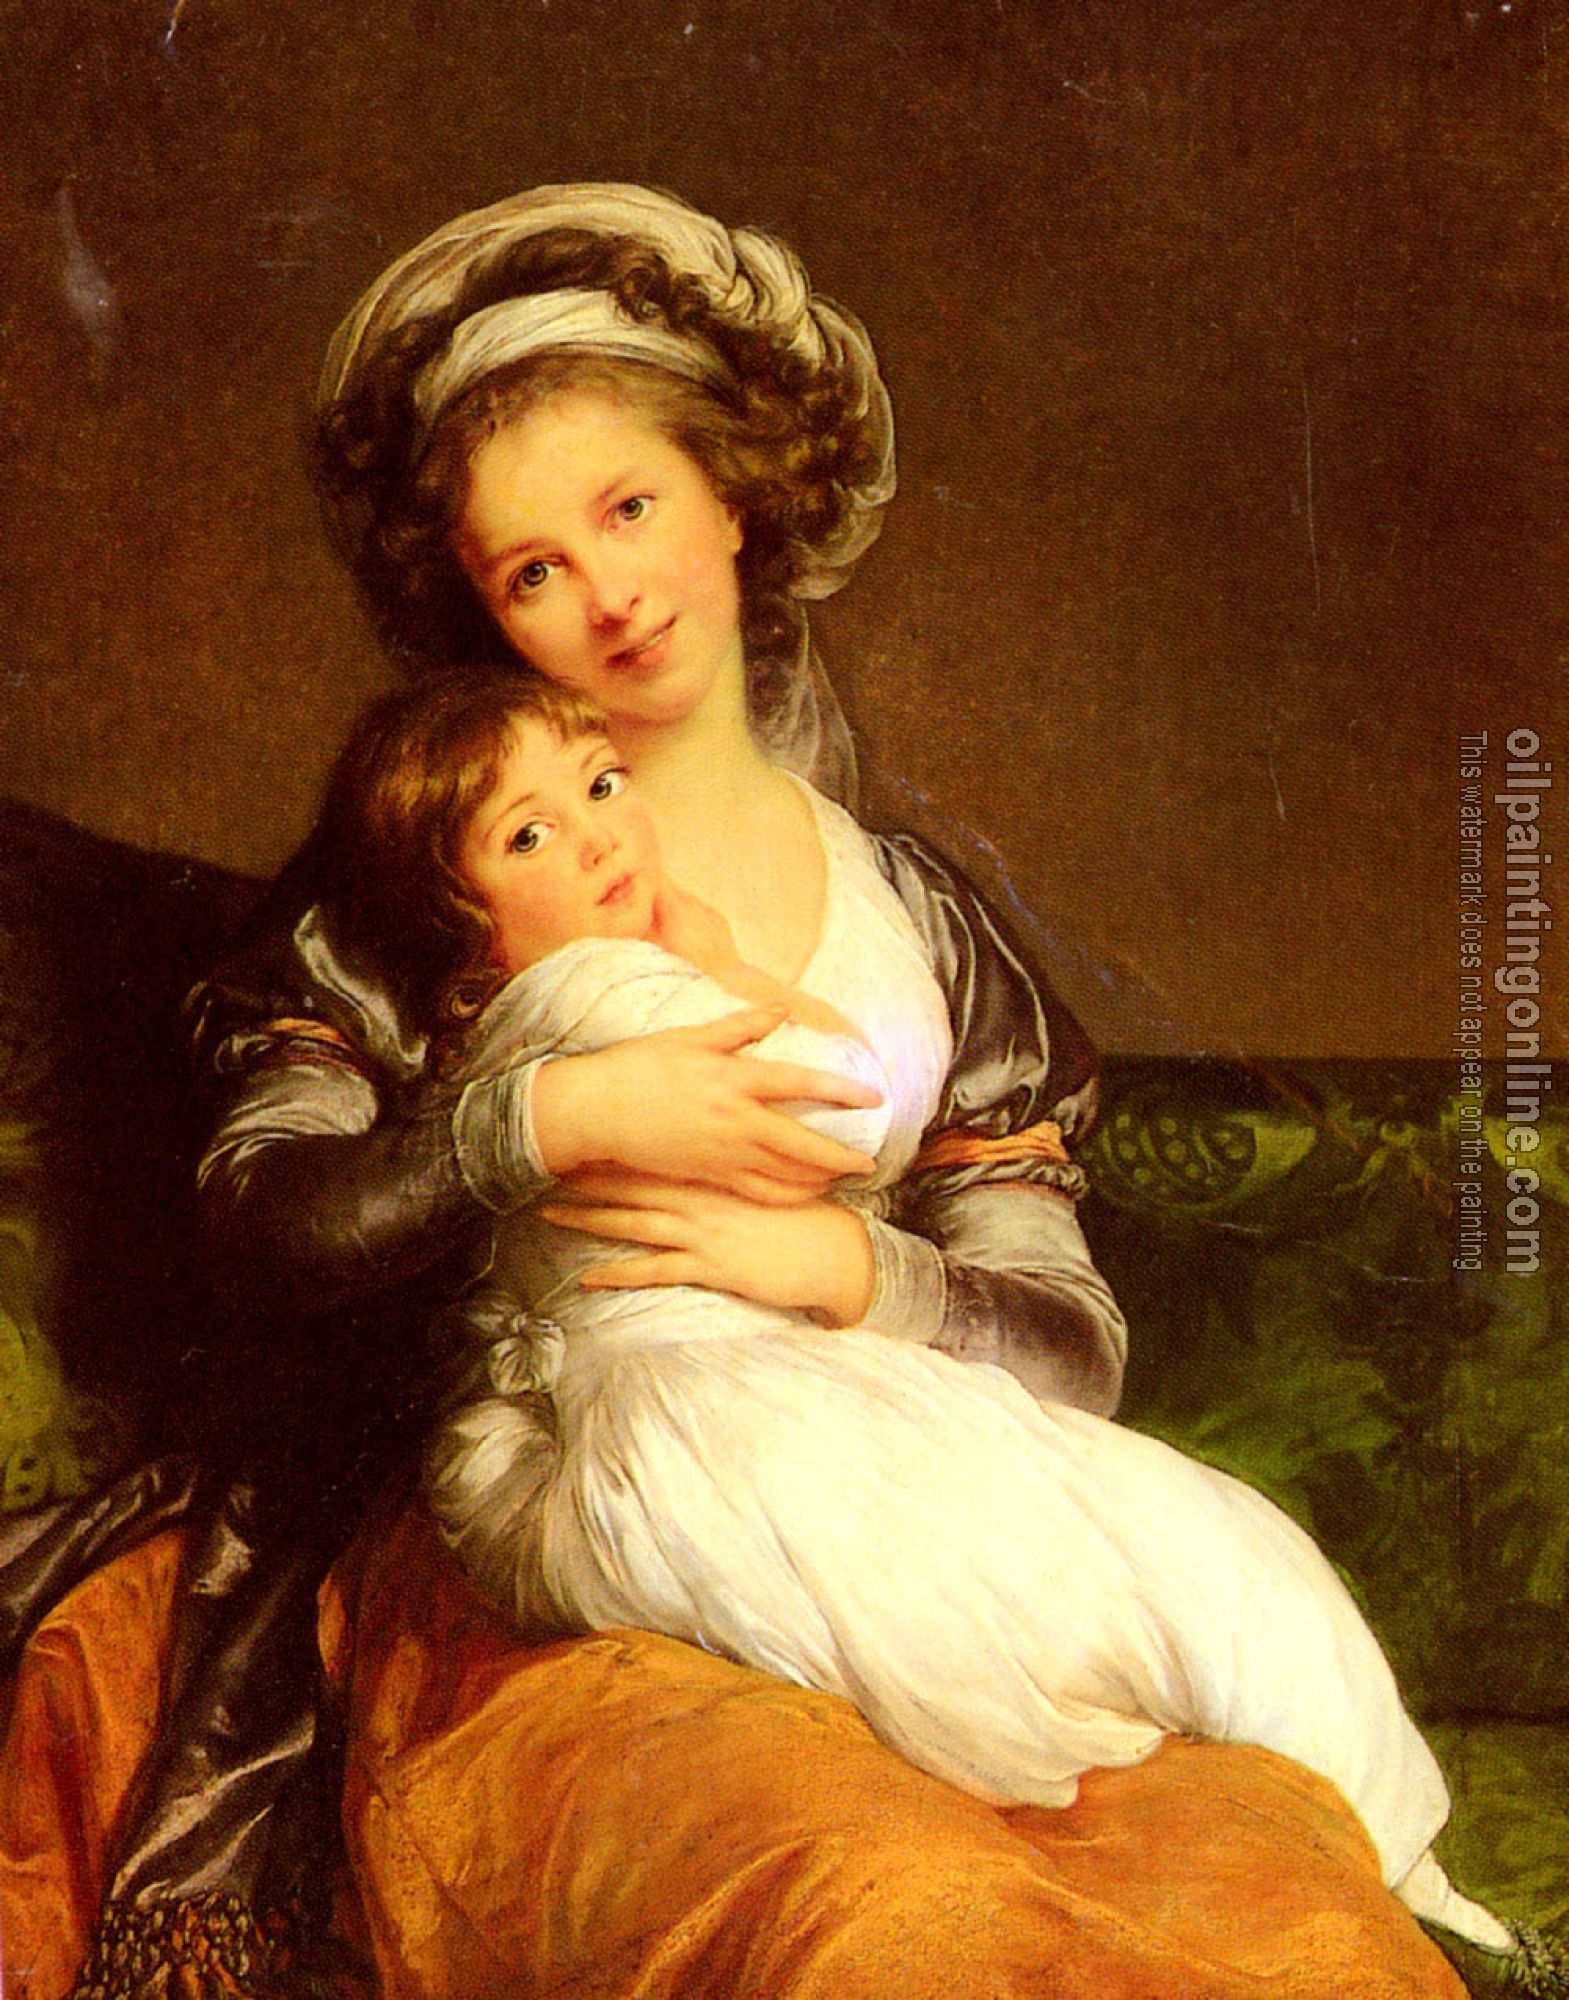 Louise Elisabeth Vigee Le Brun - Mrs Vigee-Lebrun and her daughter, Jeanne Lucie Louise